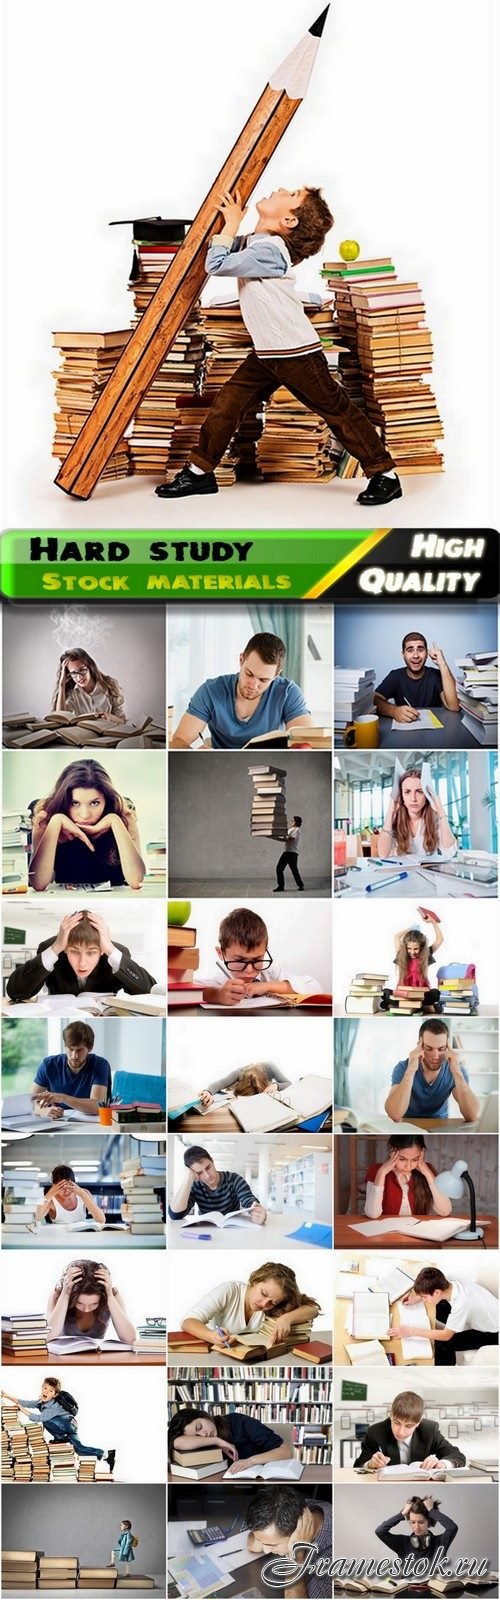 Students and schoolchildren who have hard study - 25 HQ Jpg